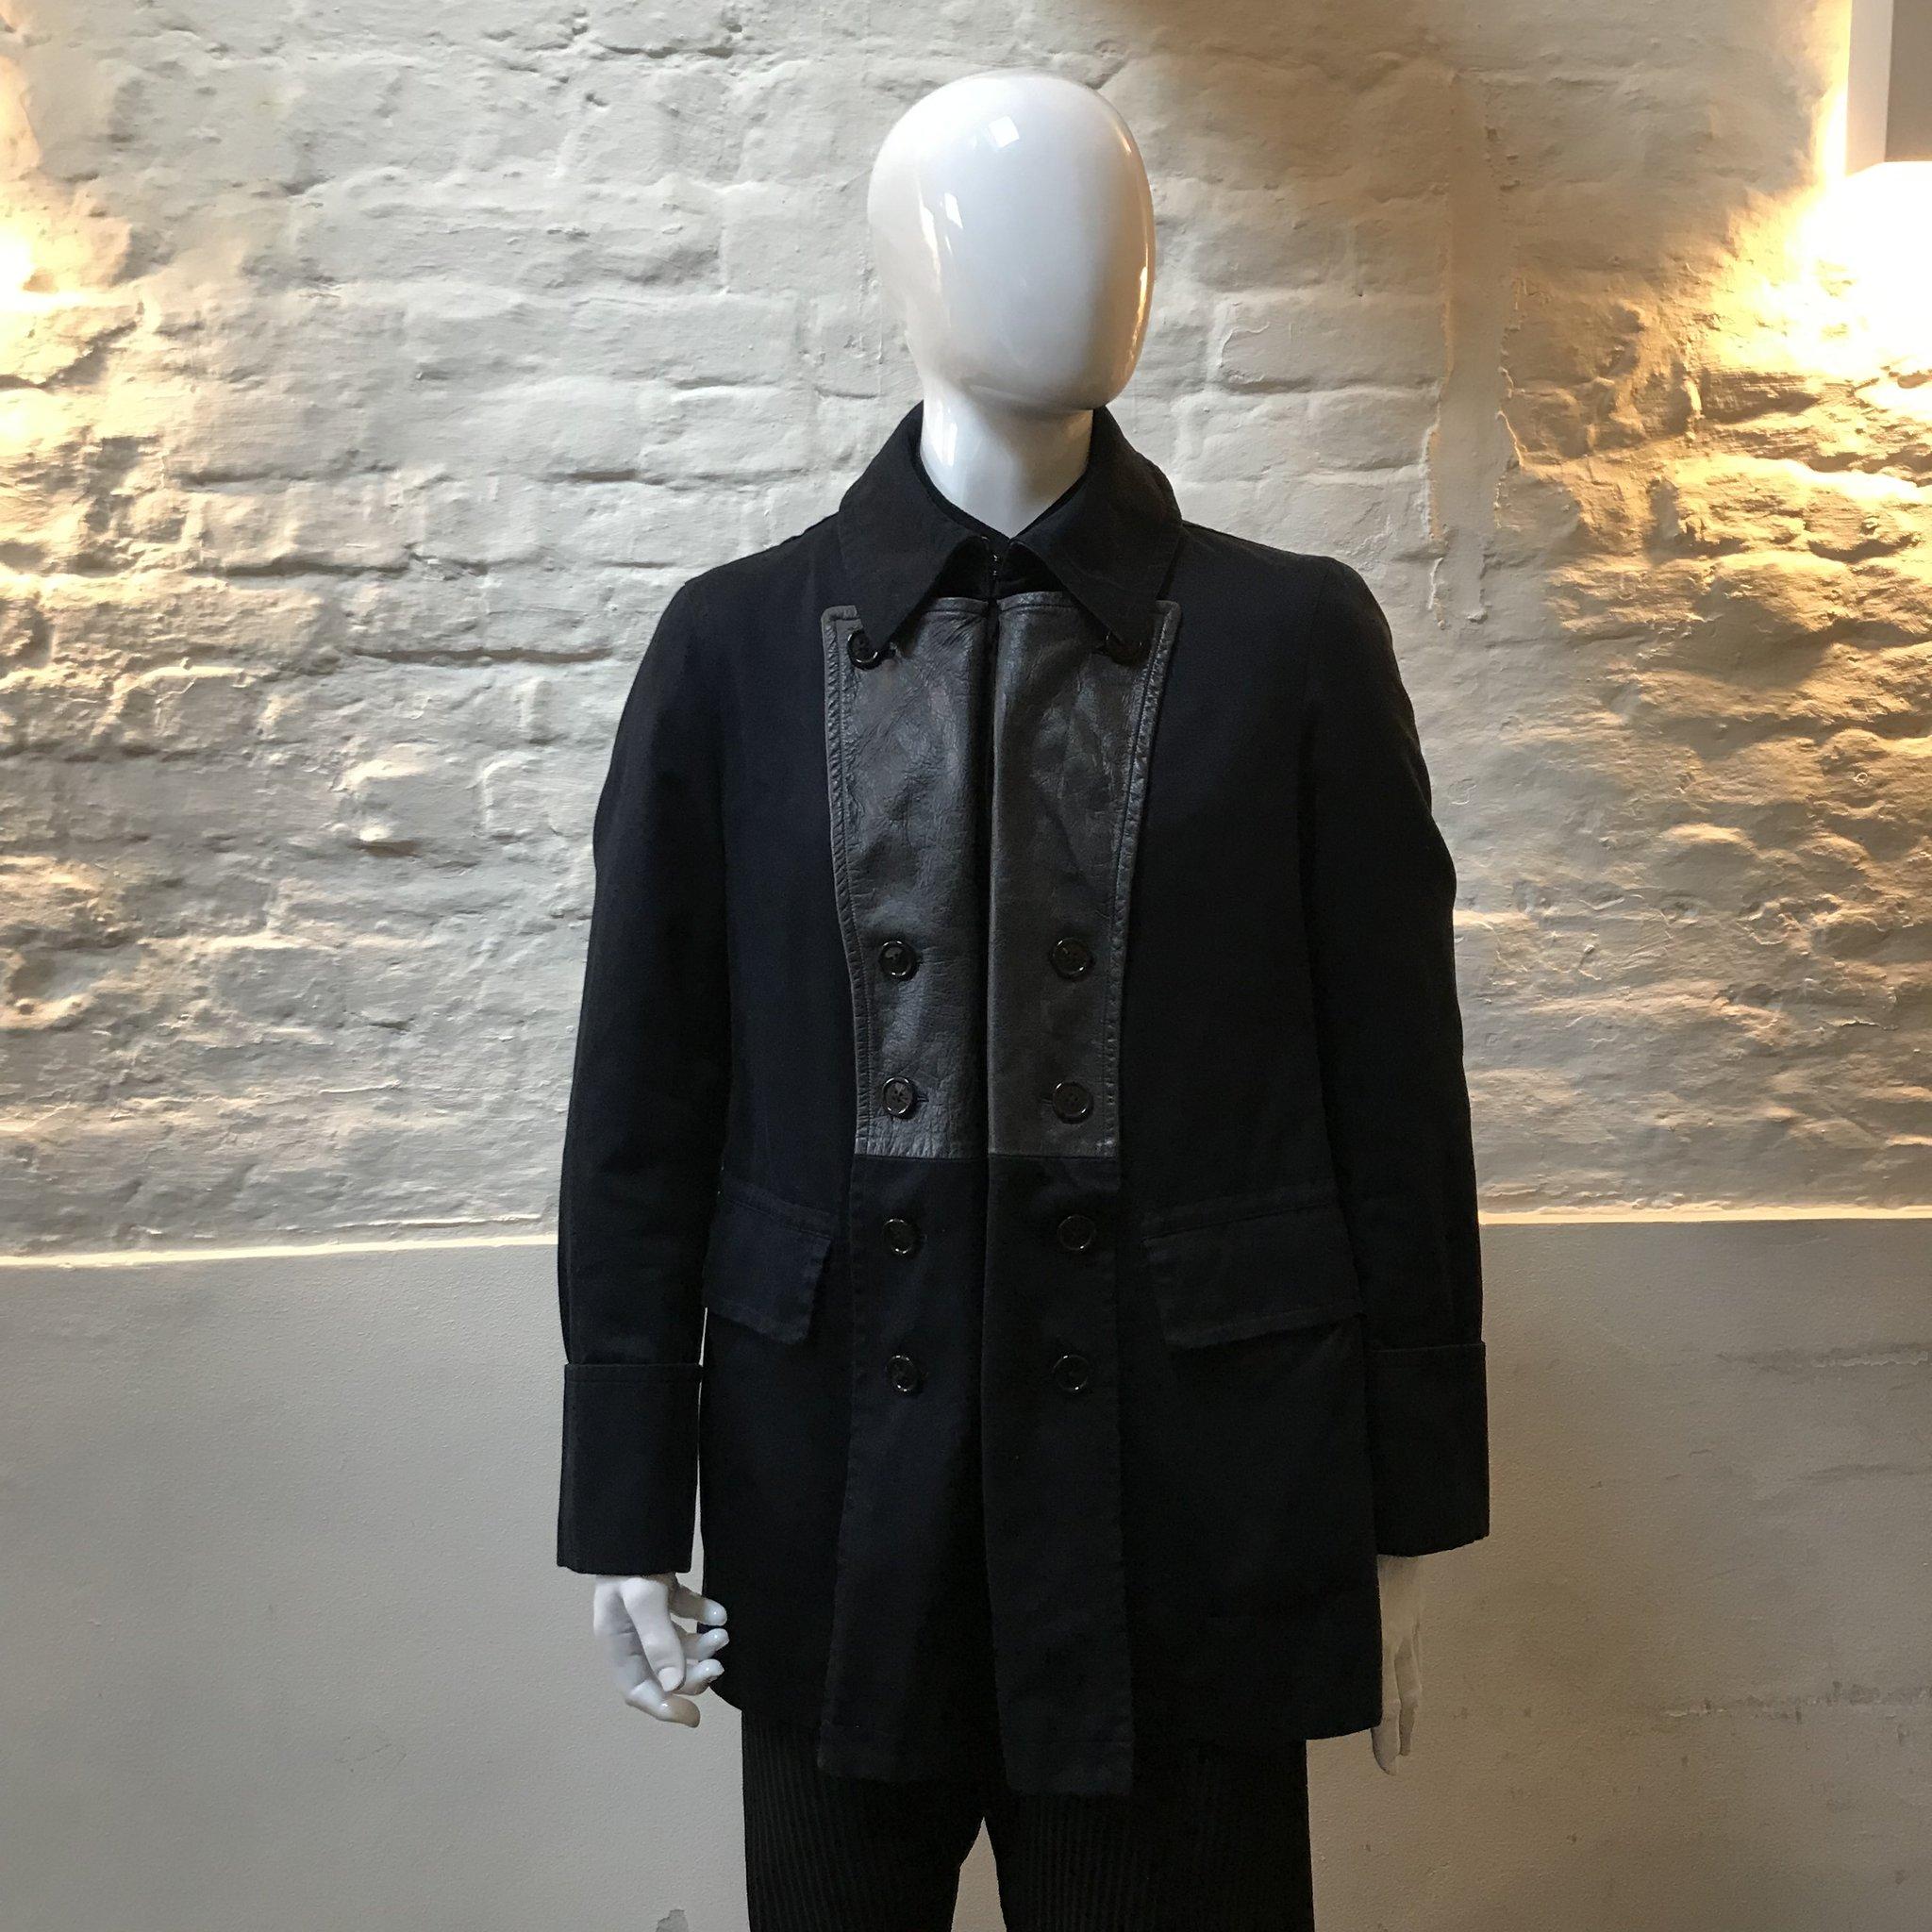 Yohji Yamamoto Leather Trim Pea Coat made in Japan from wool and leather. 

Yohji Yamamoto is known for the avant-garde spirit of his clothing. His signature oversized silhouettes in black often feature drapery in varying textures. Since the